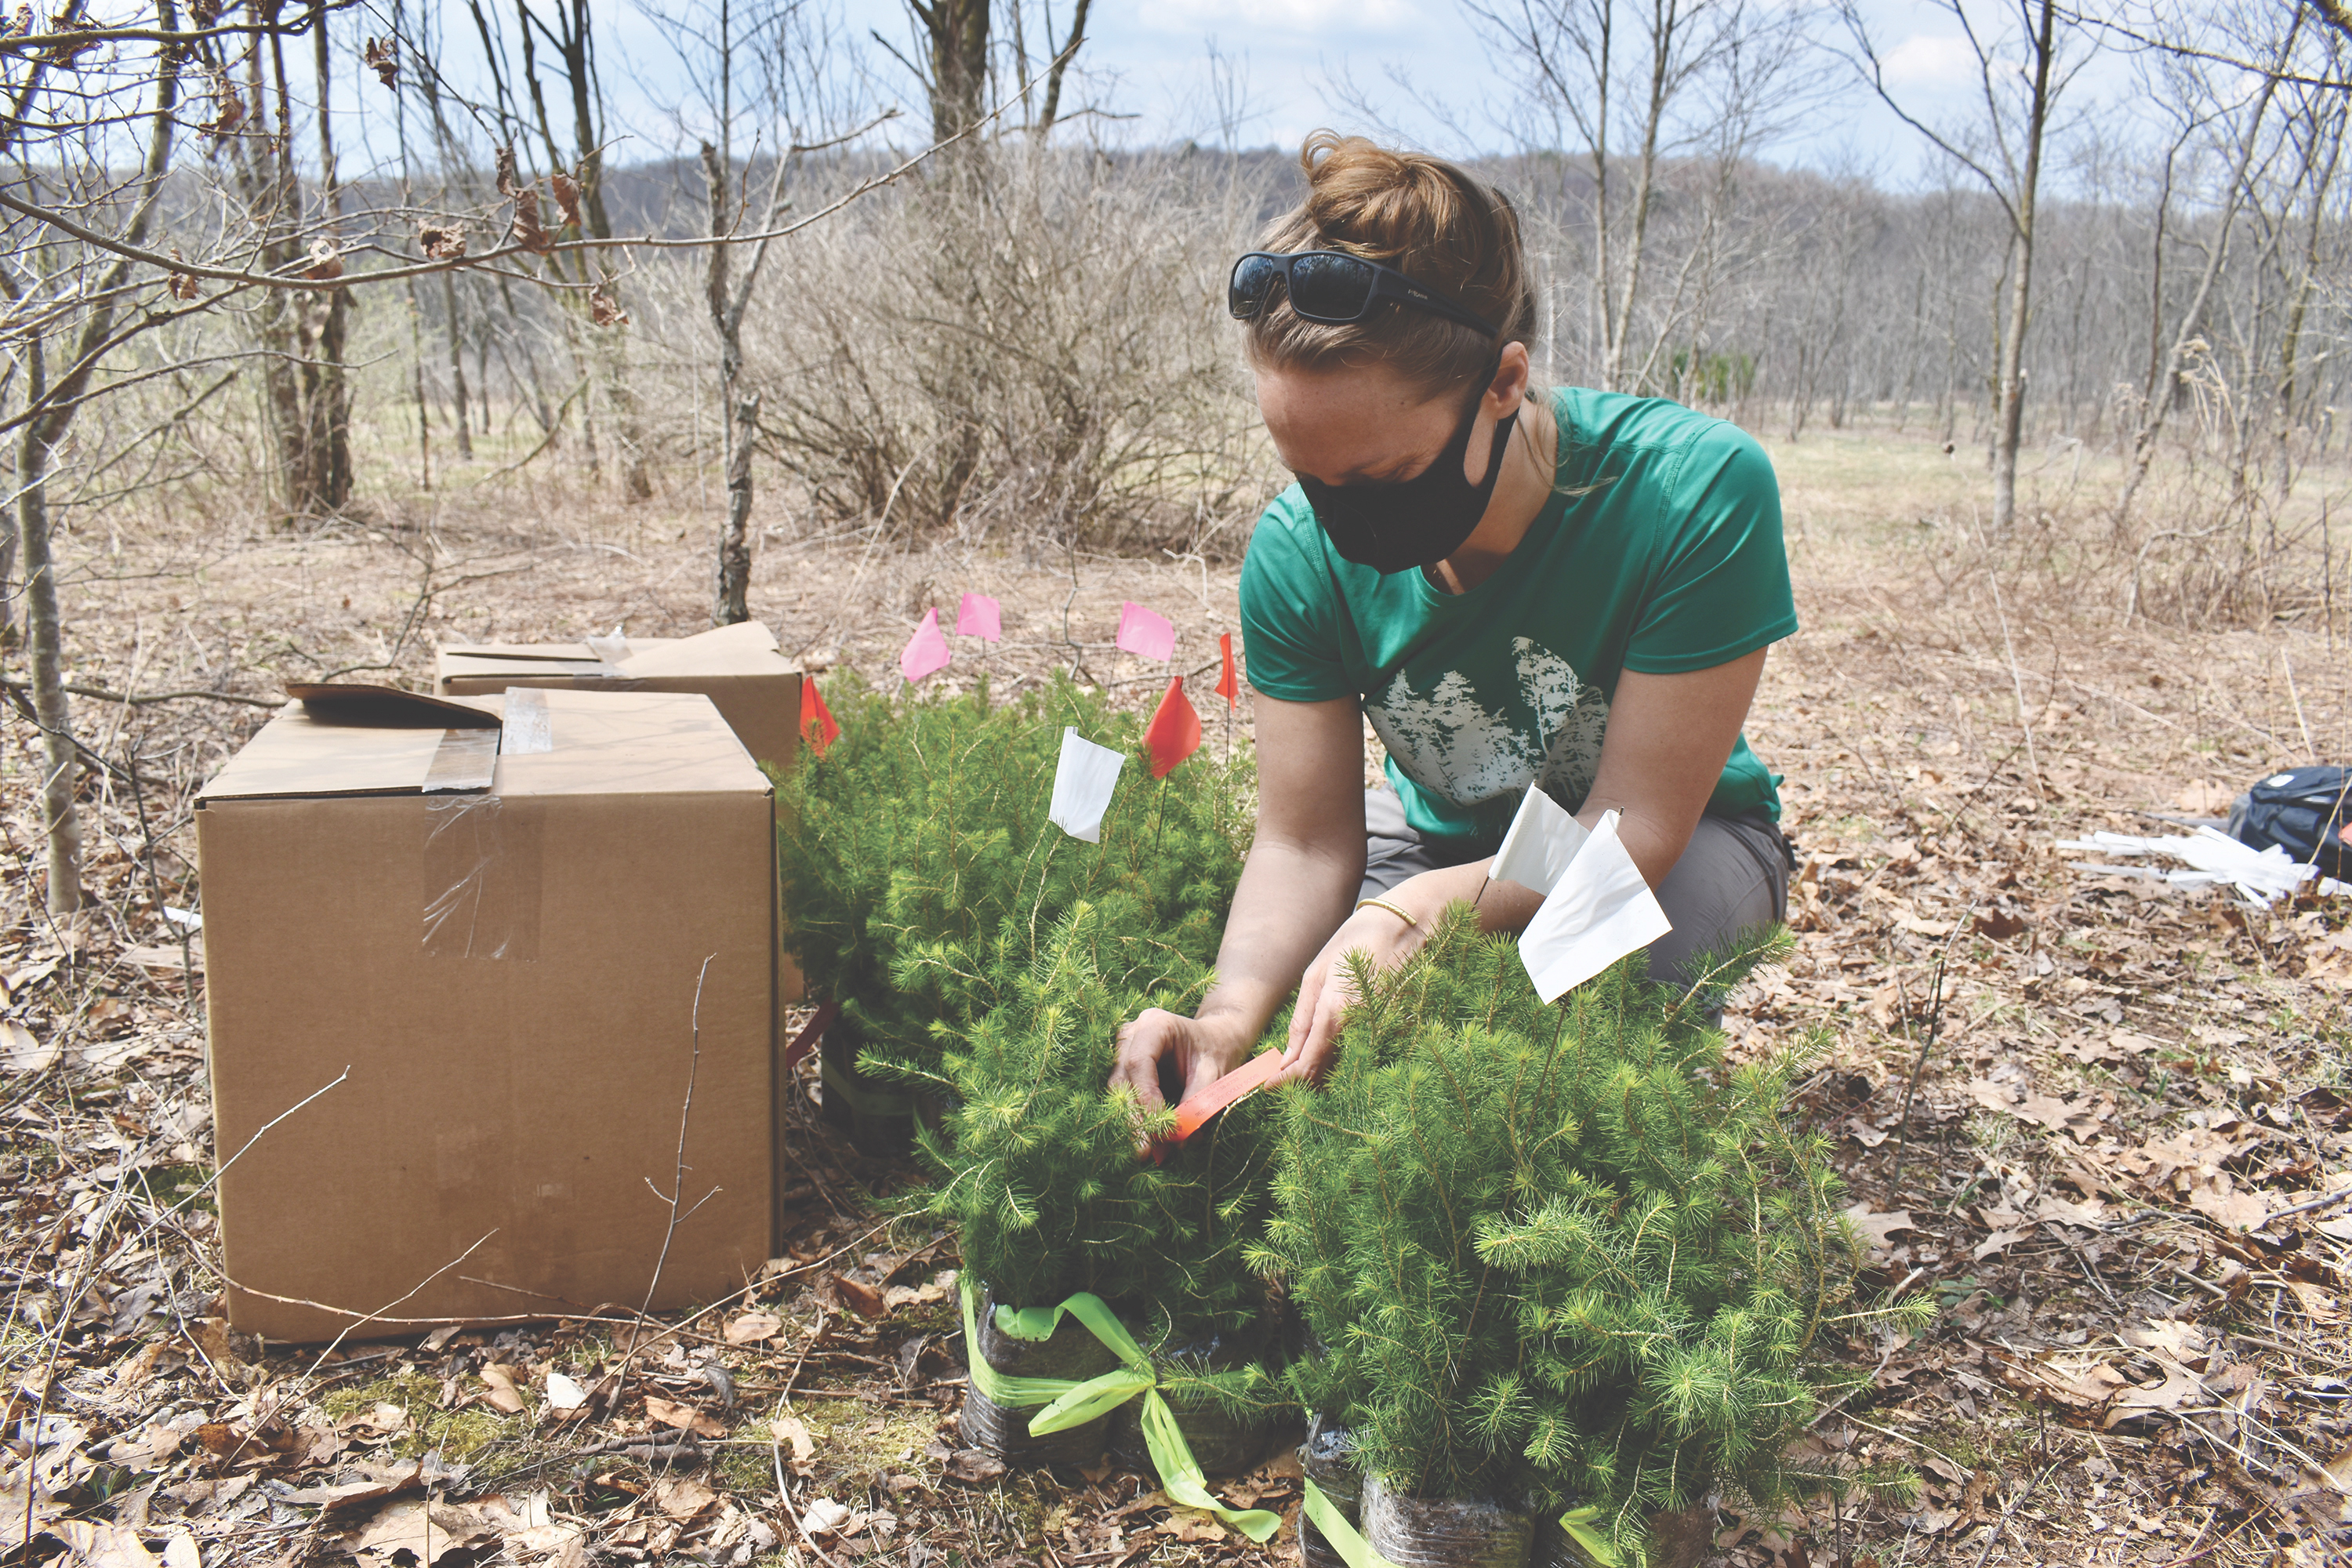 A masked woman kneels down next to a pile of red spruce seedlings. Two large square cardboard boxes of seedlings sit on the ground next to her.